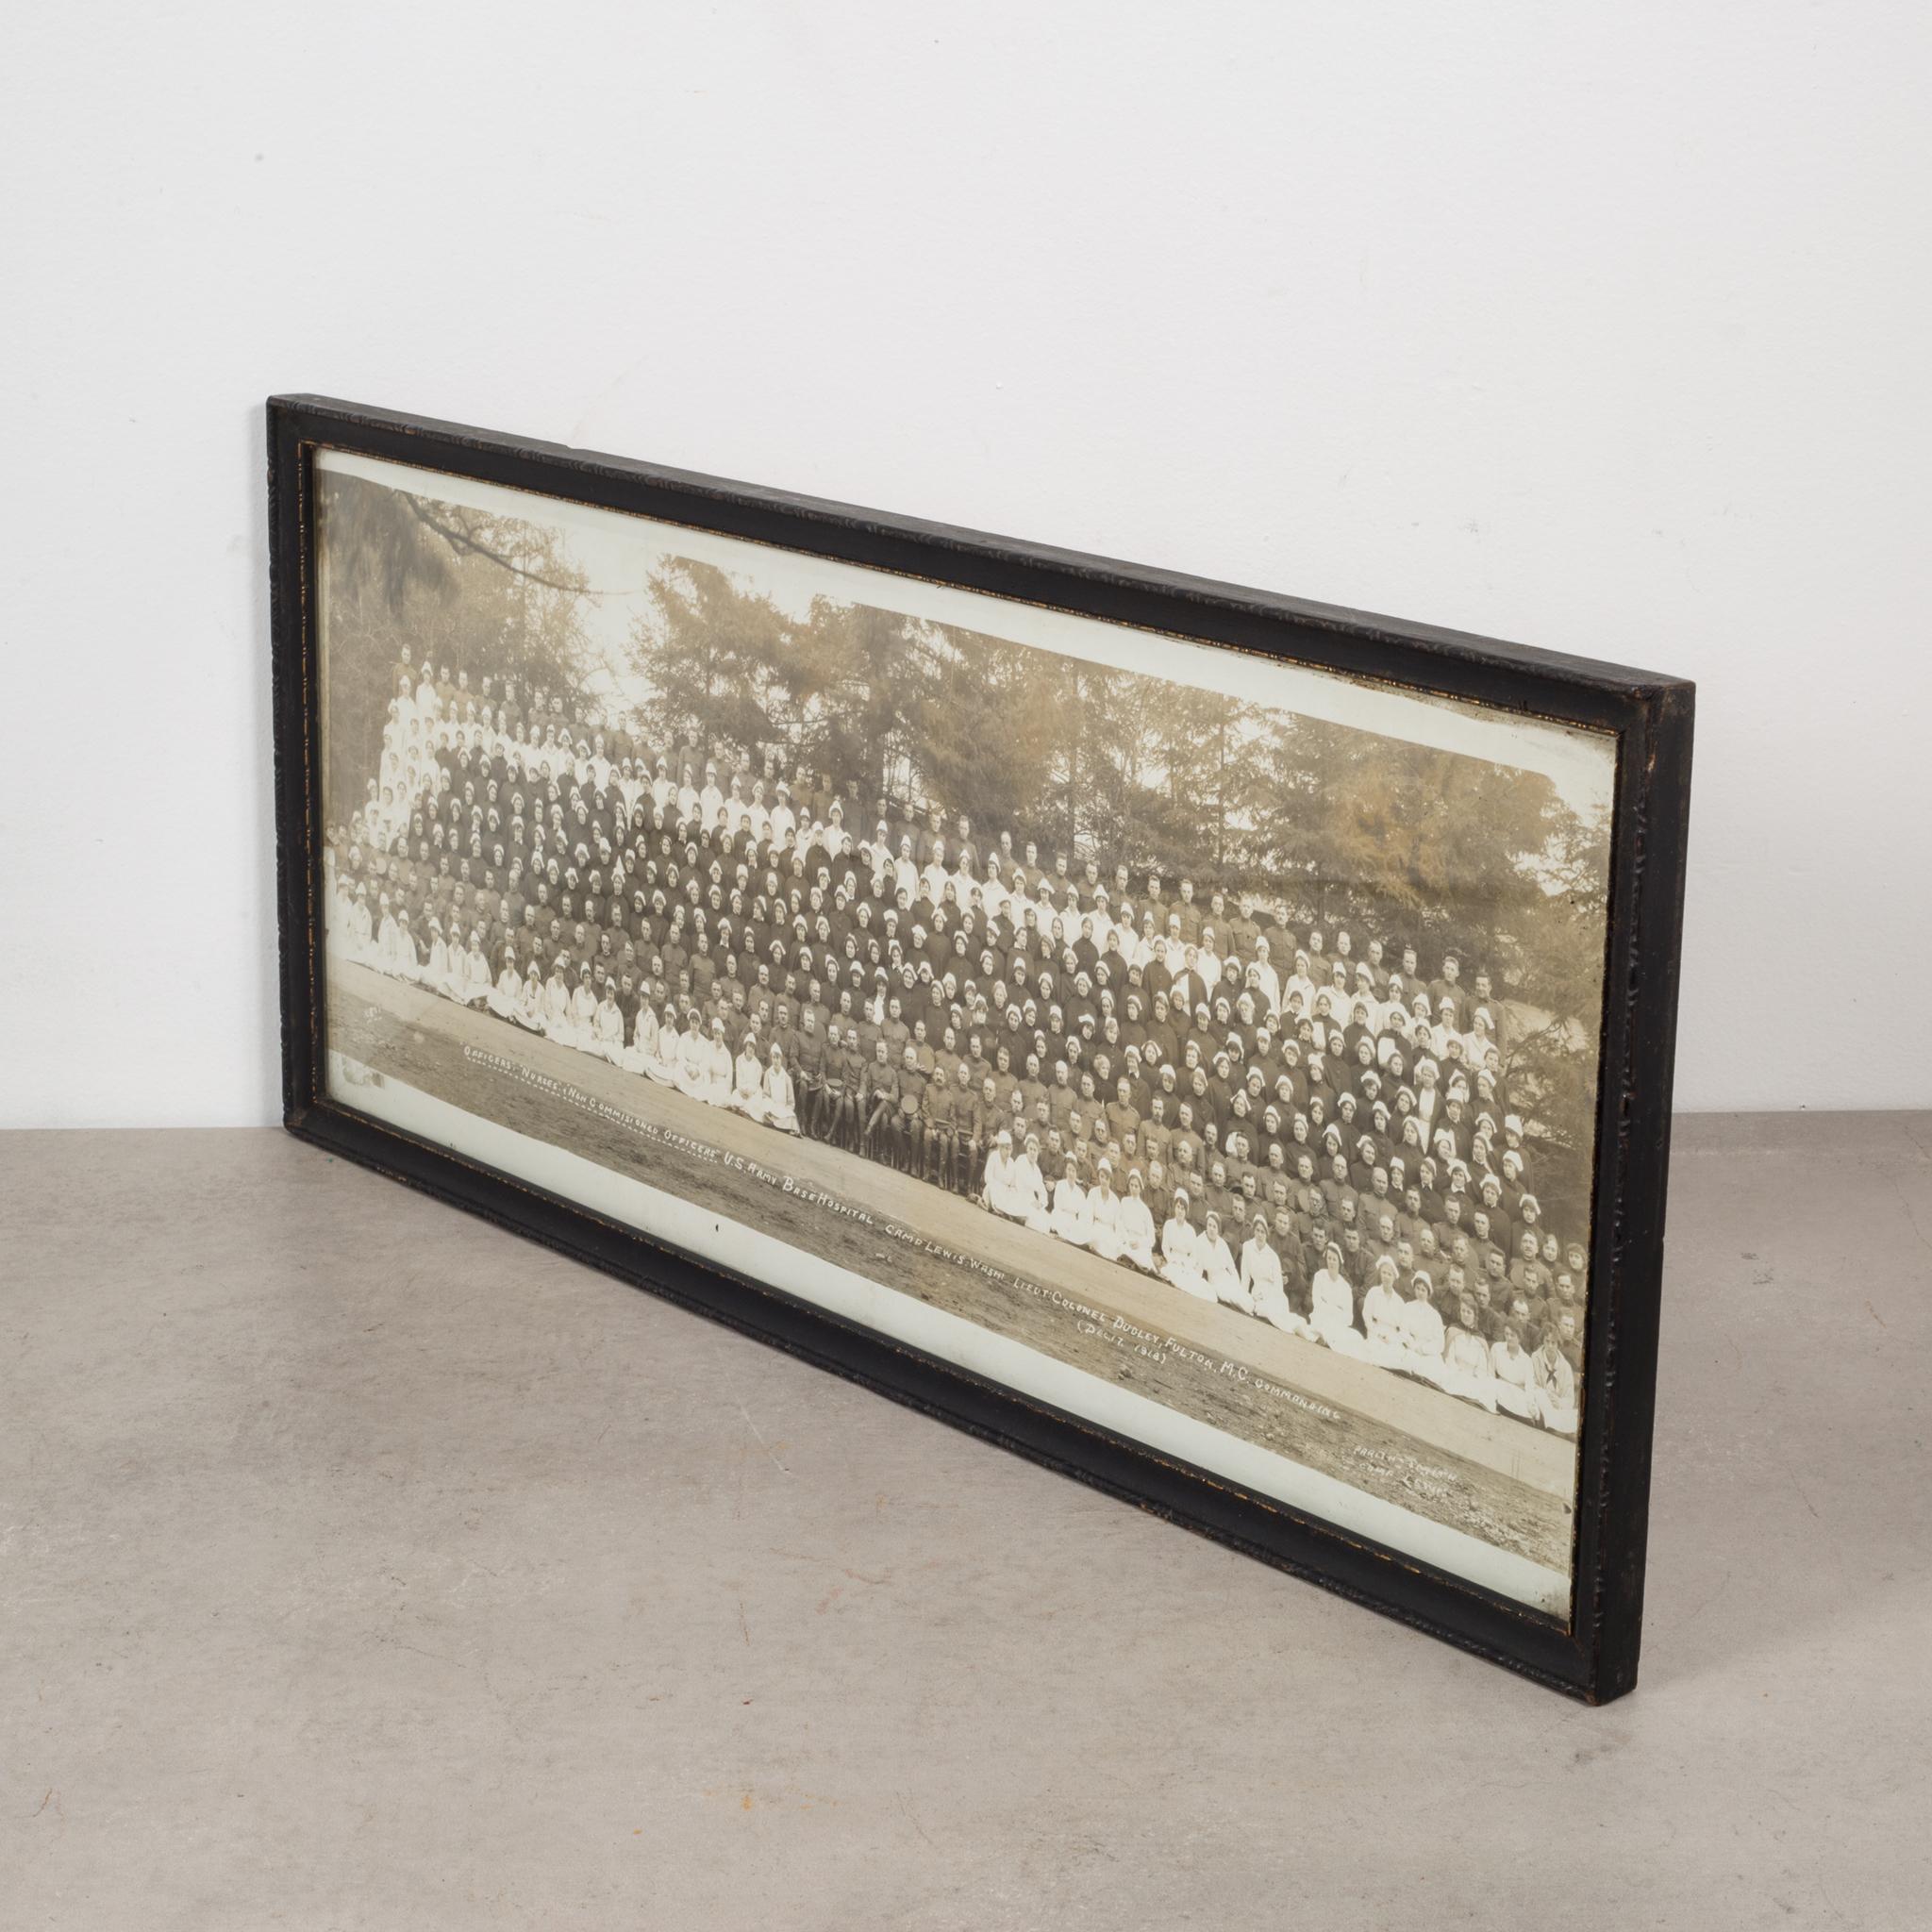 About

An original panoramic photo of a group of officers, nurses and non-commissioned officers from the U.S. Base Hospital in Camp Lewis Washington. The photo is black and white and framed in the original wooden frame. The picture has faded